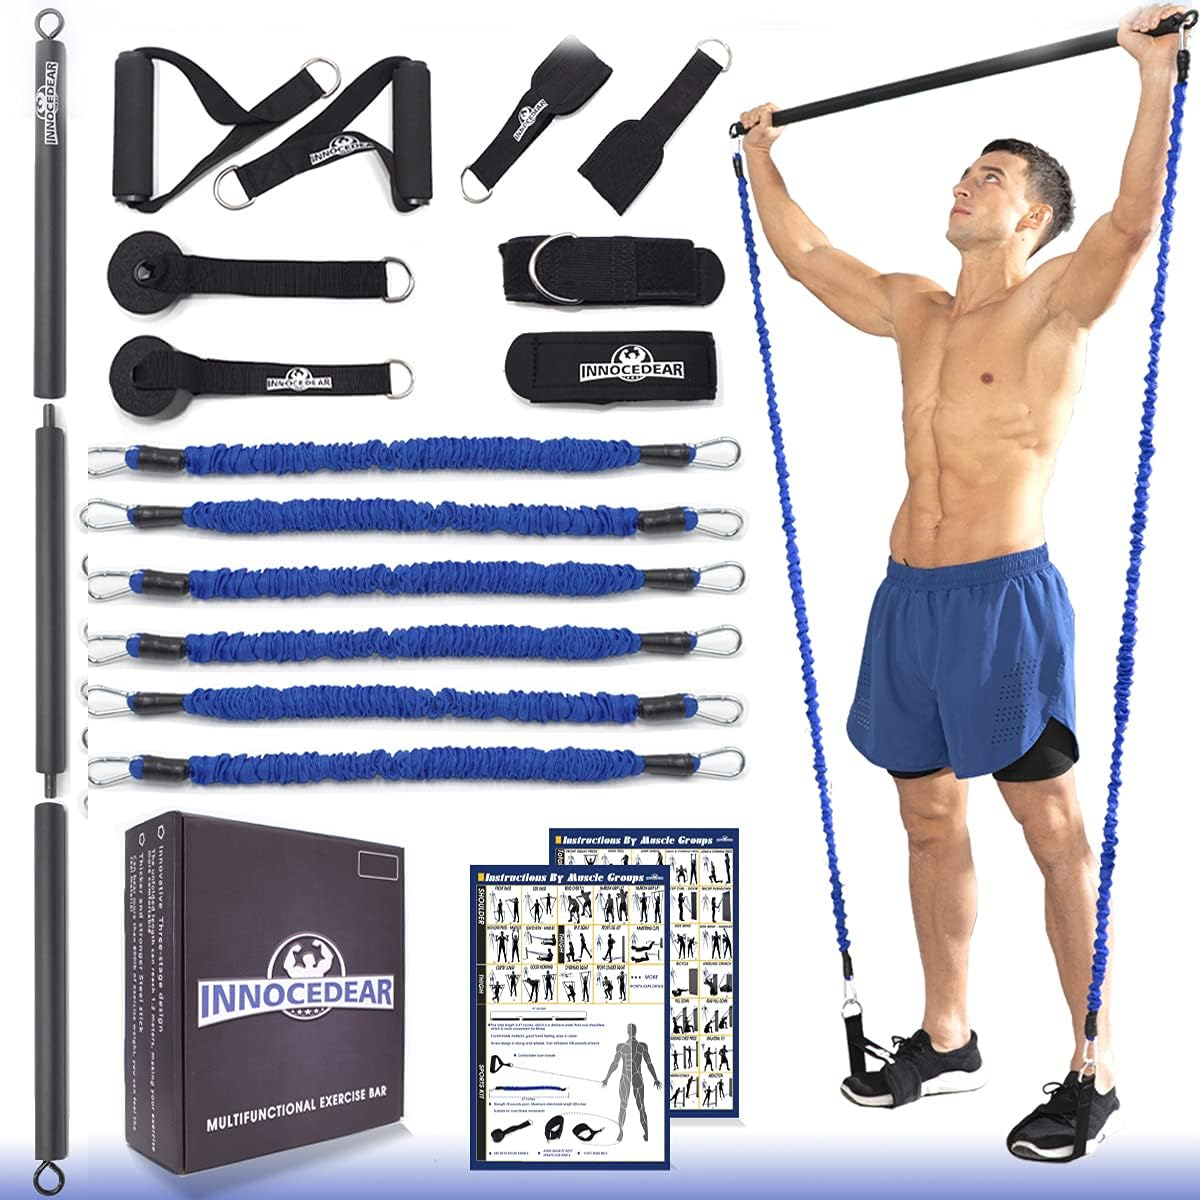 INNOCEDAR Home Gym Bar Kit with Resistance Bands,Portable Gym Full Body Workout,Adjustable Pilates Bar System,Safe Exercise Weight Set,Home Exercise Equipment for MenWomen- MuscleFitness